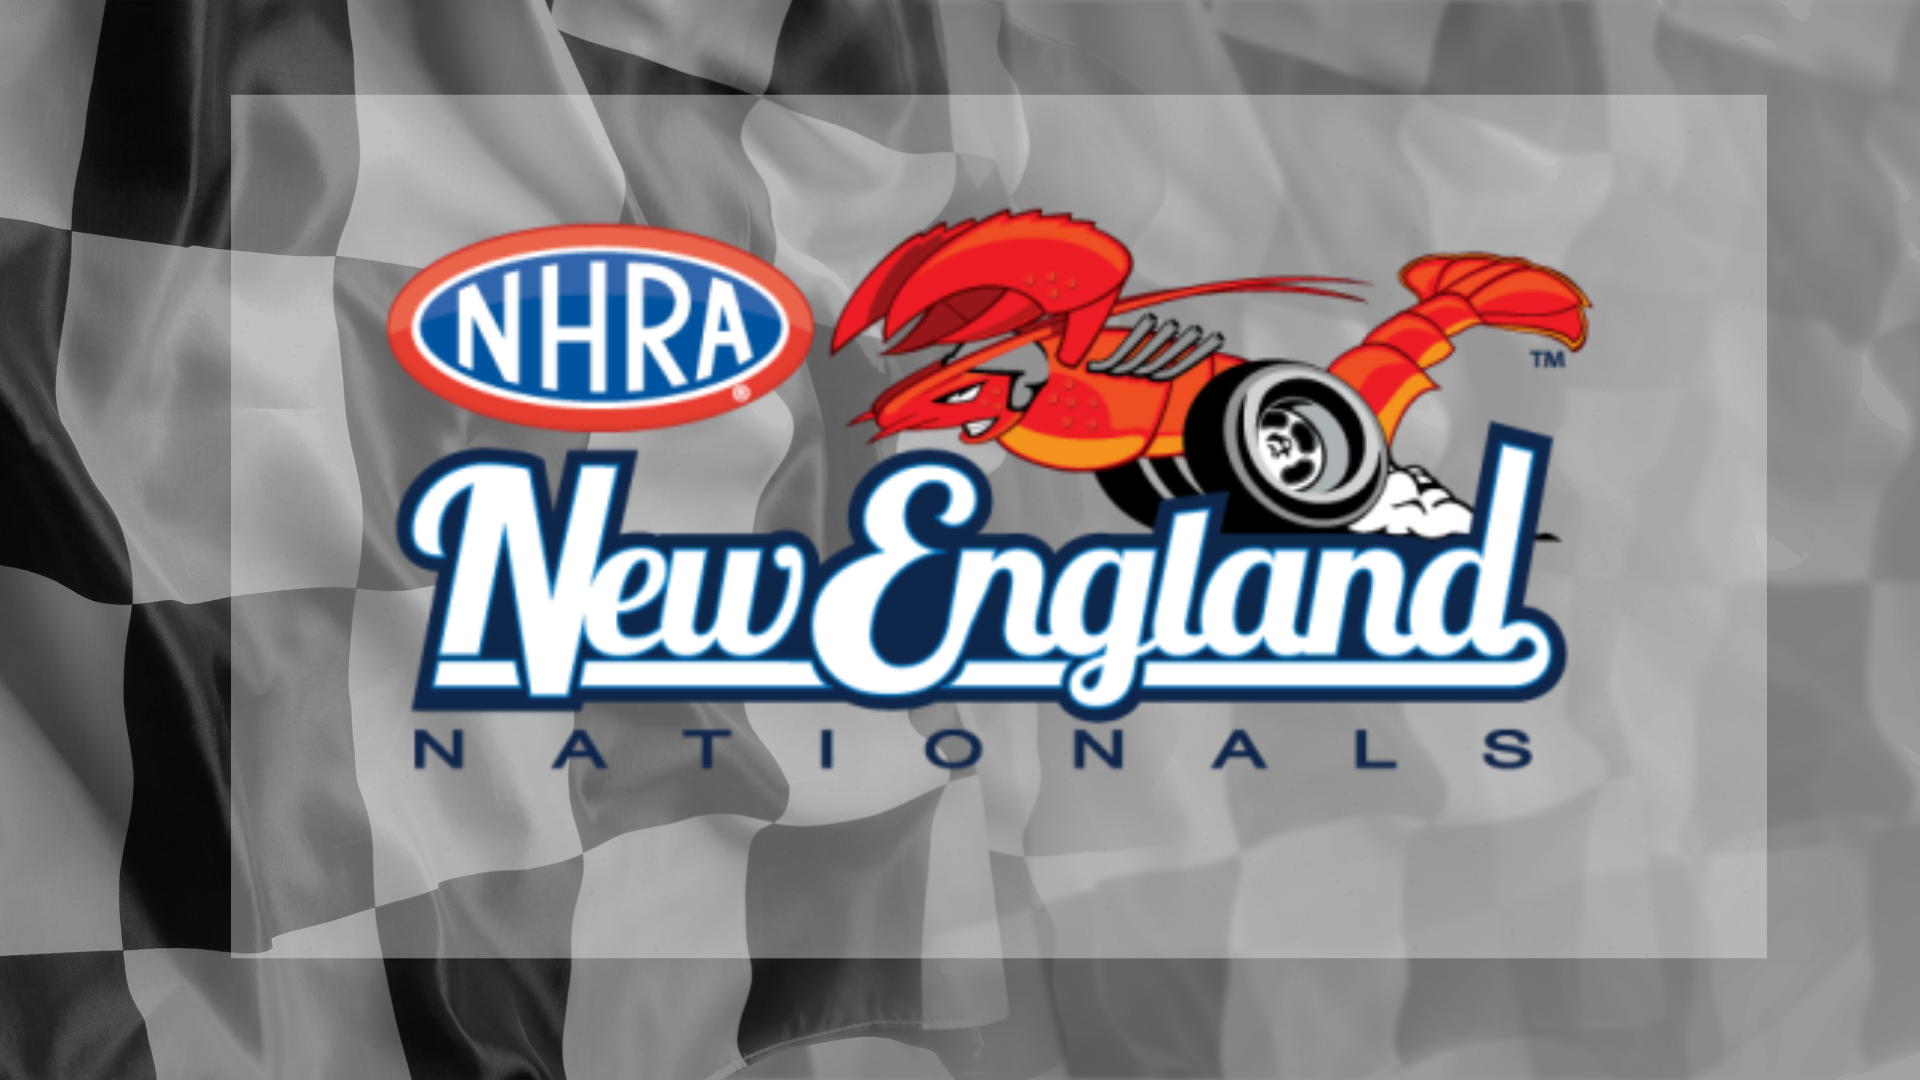 Win Tickets To NHRA New England Nationals At New England Dragway